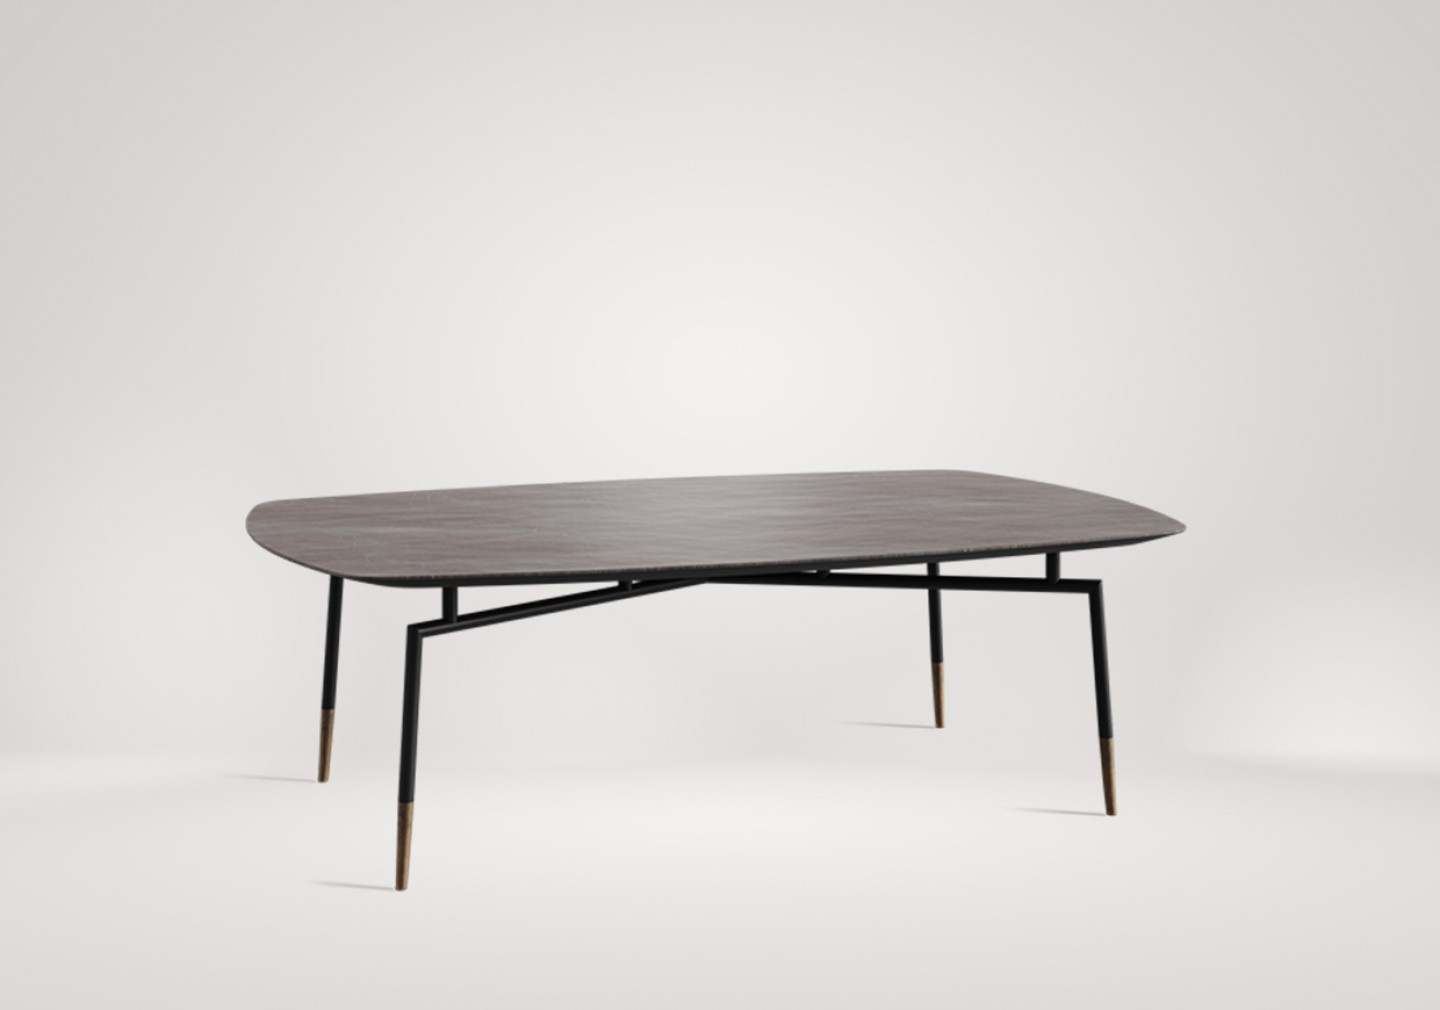 THE GRIG COFFEE TABLE